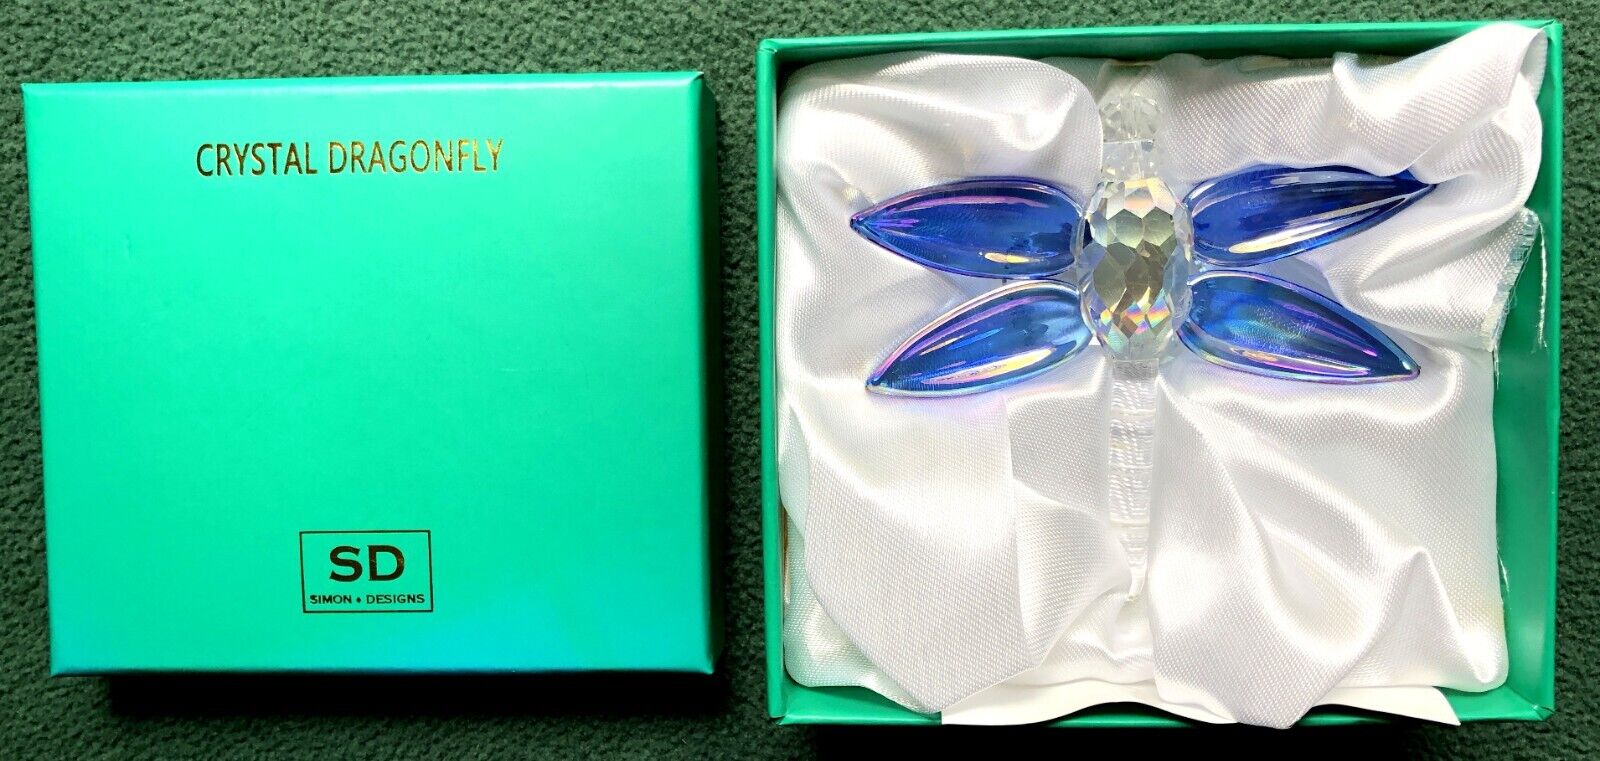 Simon Designs Blue Iridescent Crystal Dragonfly New in Box